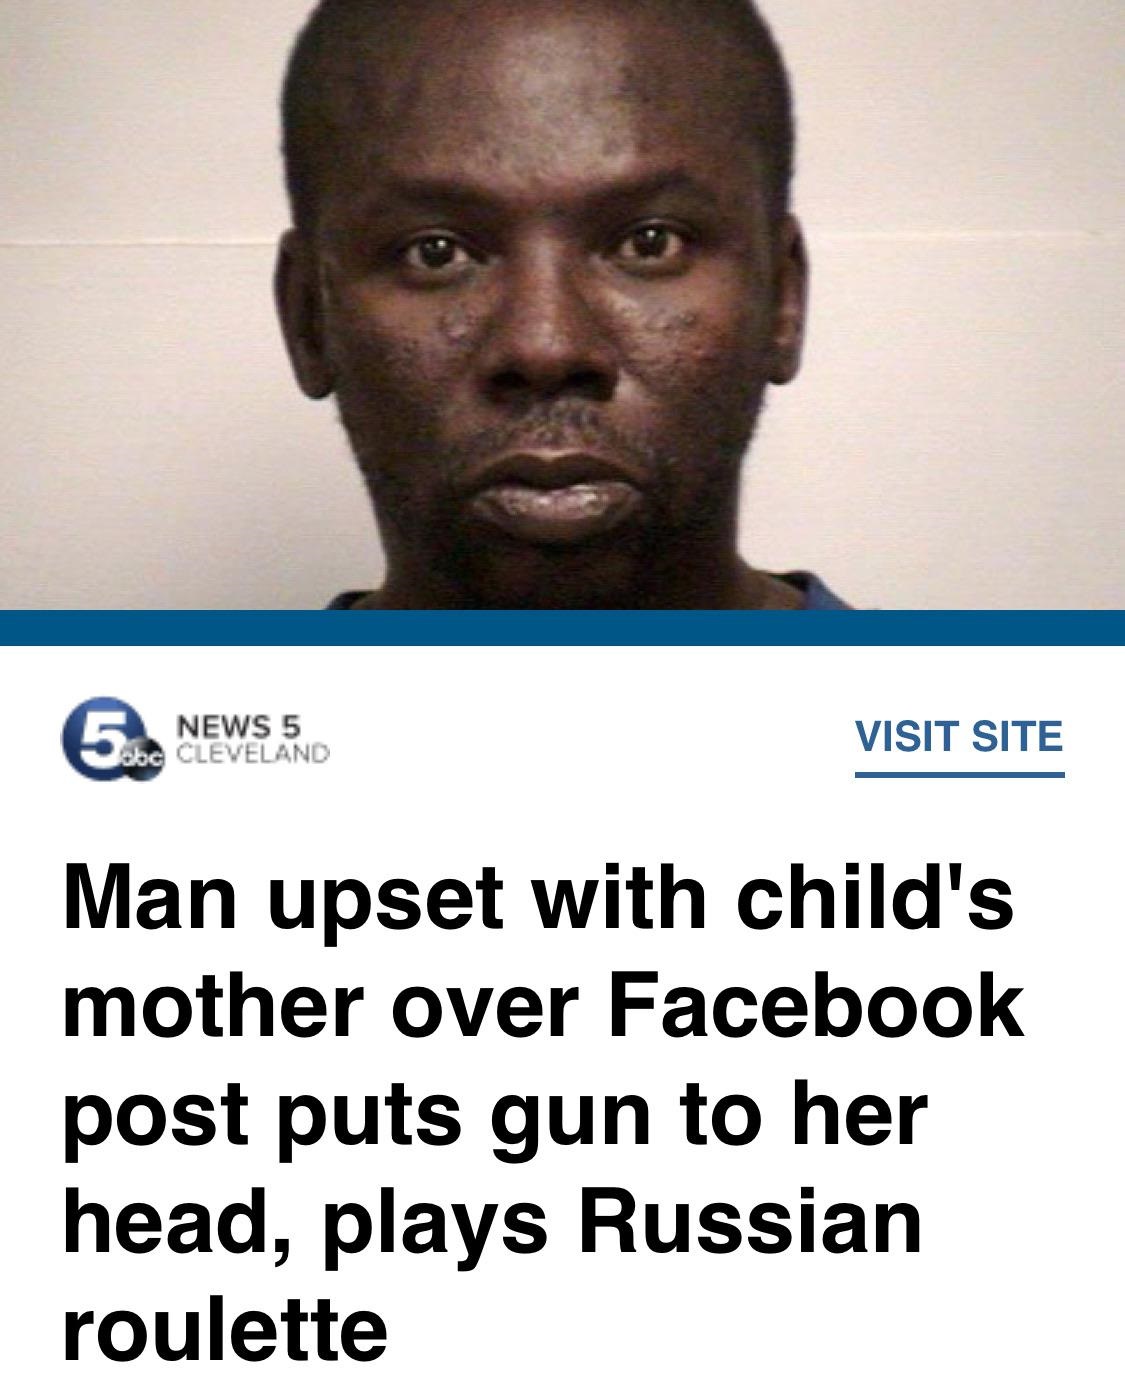 manus island - News 5 abc Cleveland Visit Site Man upset with child's mother over Facebook post puts gun to her head, plays Russian roulette